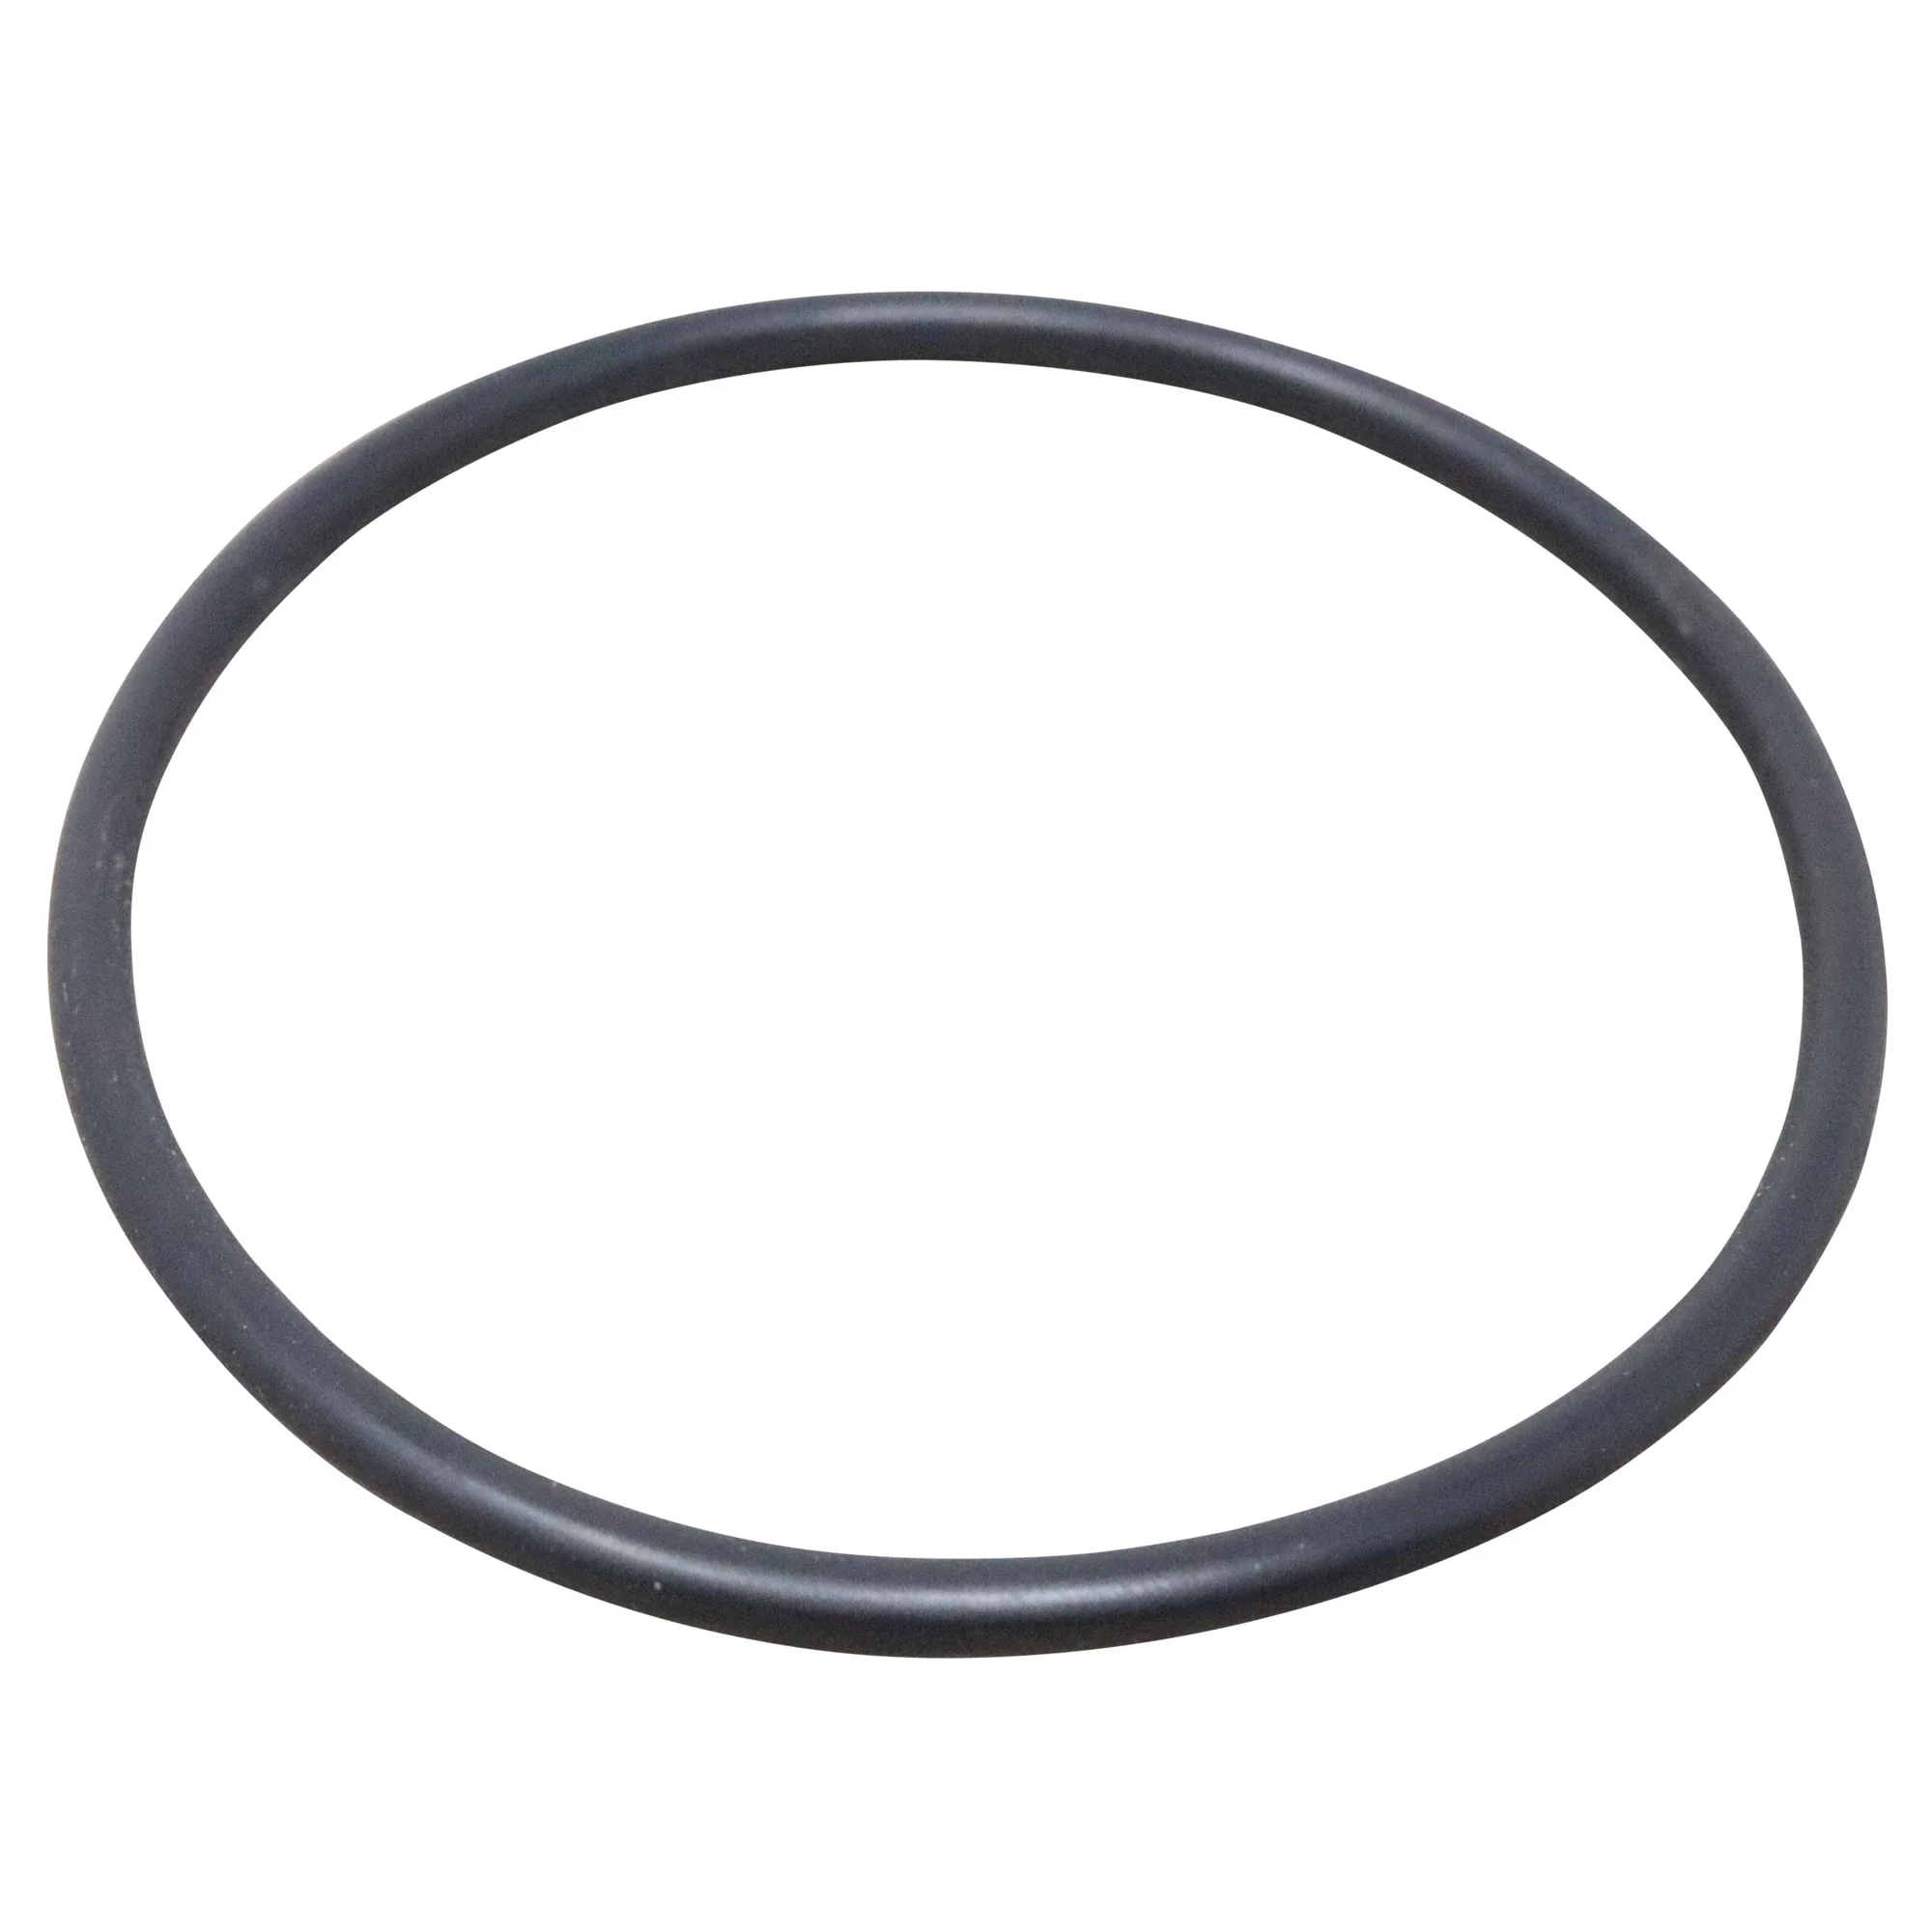 Wastebuilt® Replacement for McNeilus O-Ring, Element